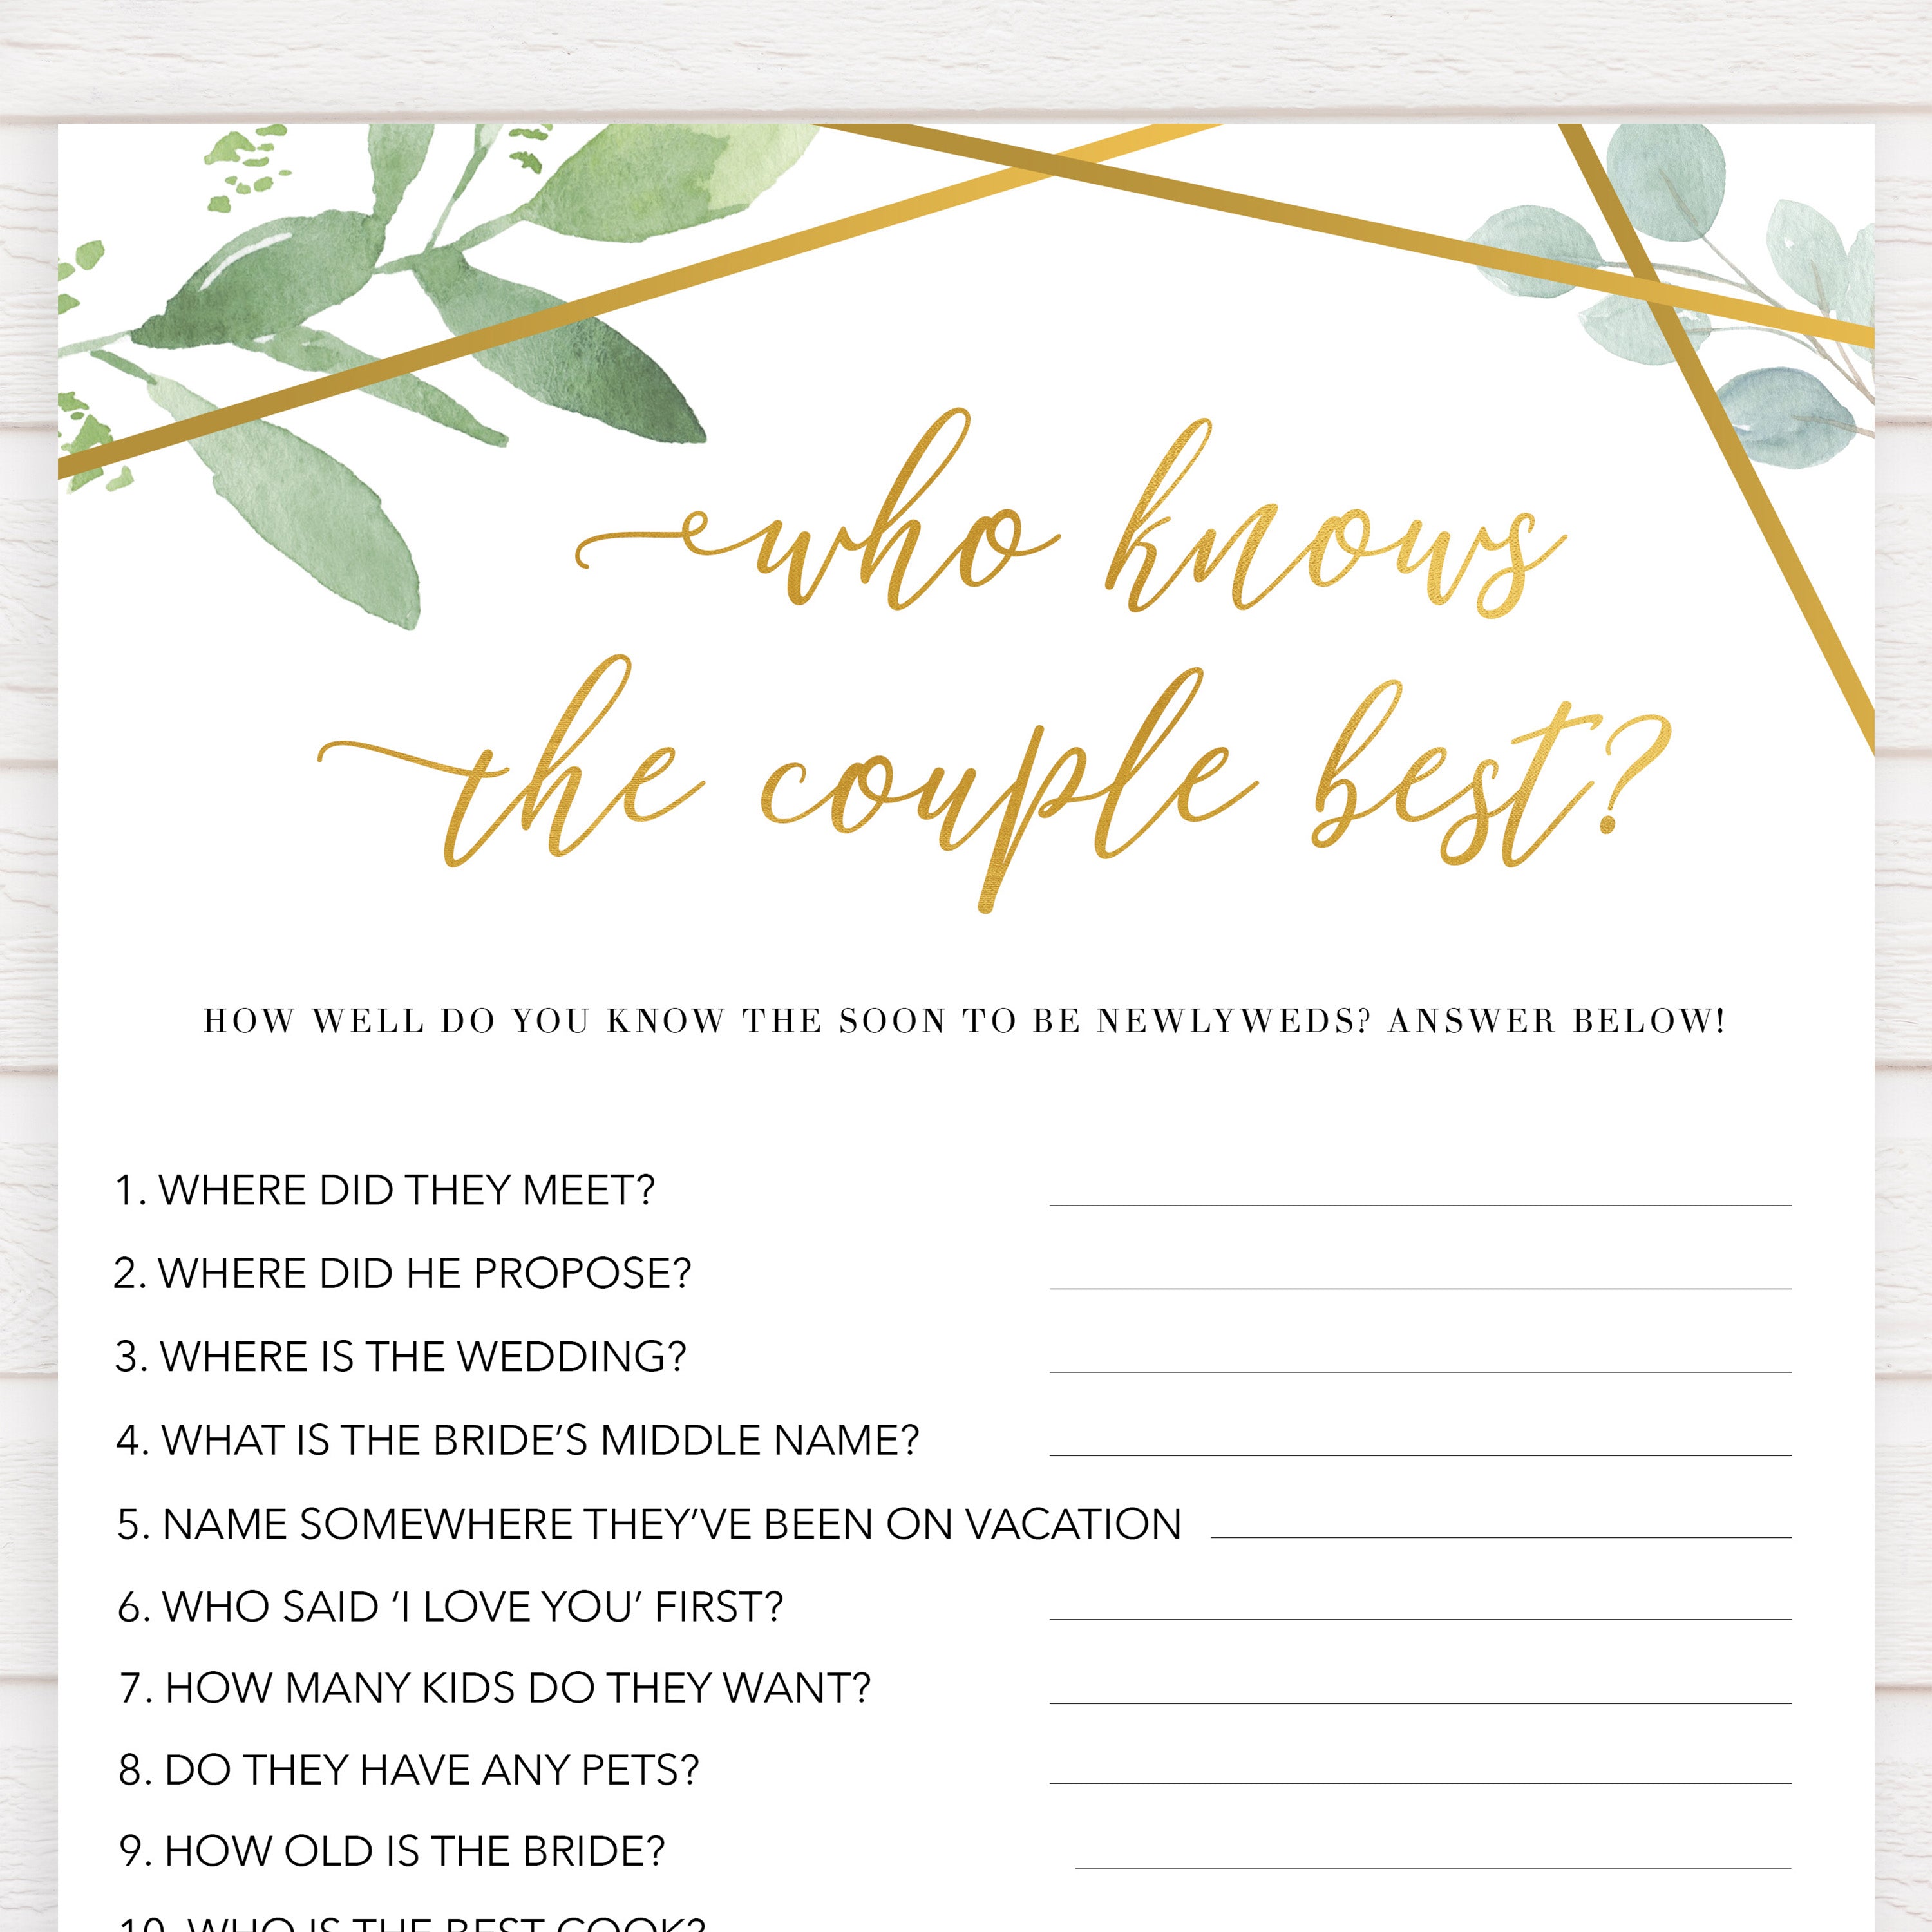 who knows the couple best game, printable baby shower games, floral bridal shower games, gold bridal shower games, bridal shower games